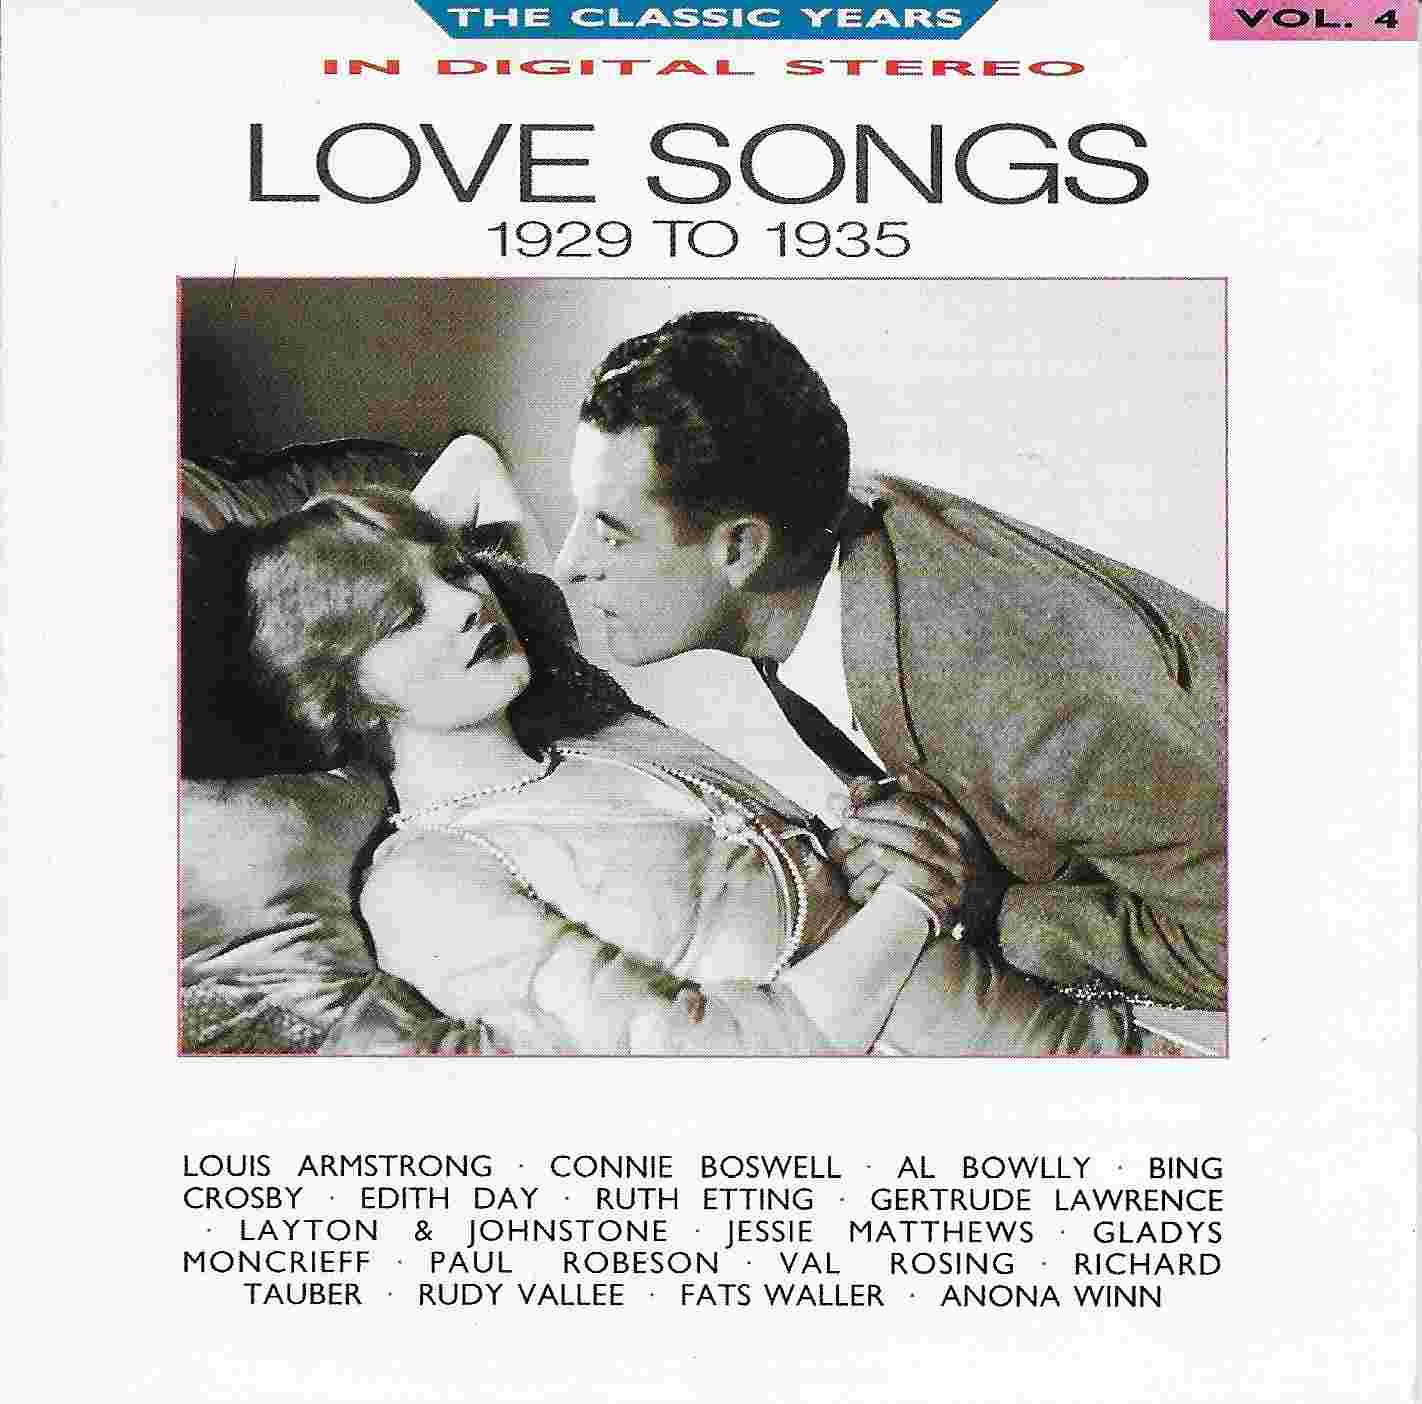 Picture of Classic years - Volume 4, Love songs by artist Various from the BBC cds - Records and Tapes library